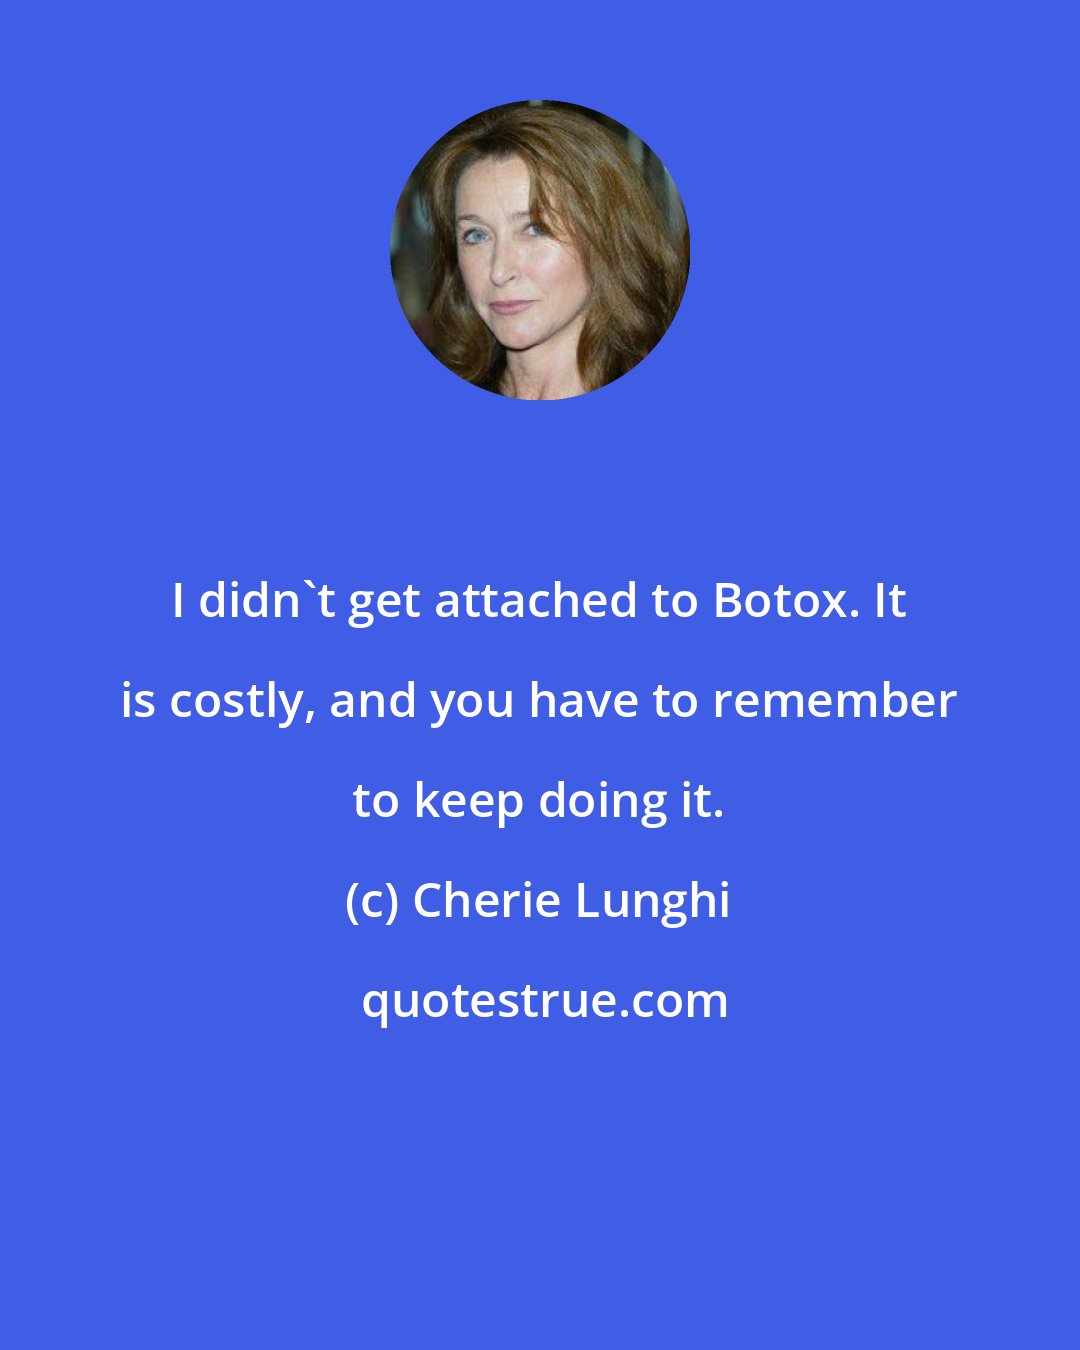 Cherie Lunghi: I didn't get attached to Botox. It is costly, and you have to remember to keep doing it.